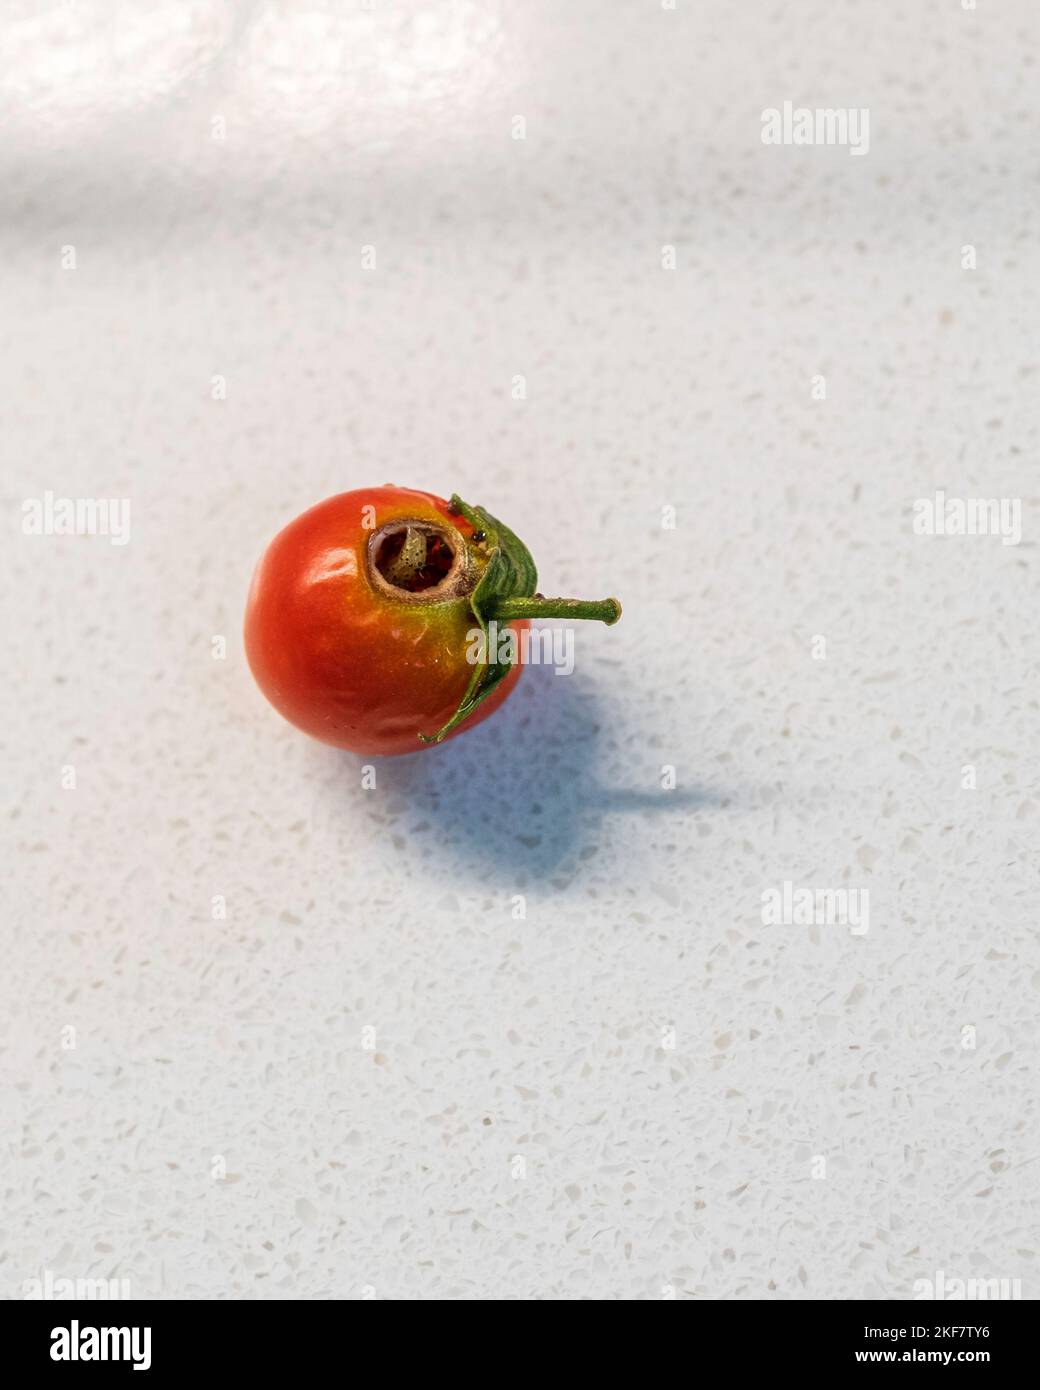 A small caterpillar eating inside out of a tomato. Kansas, USA Stock Photo